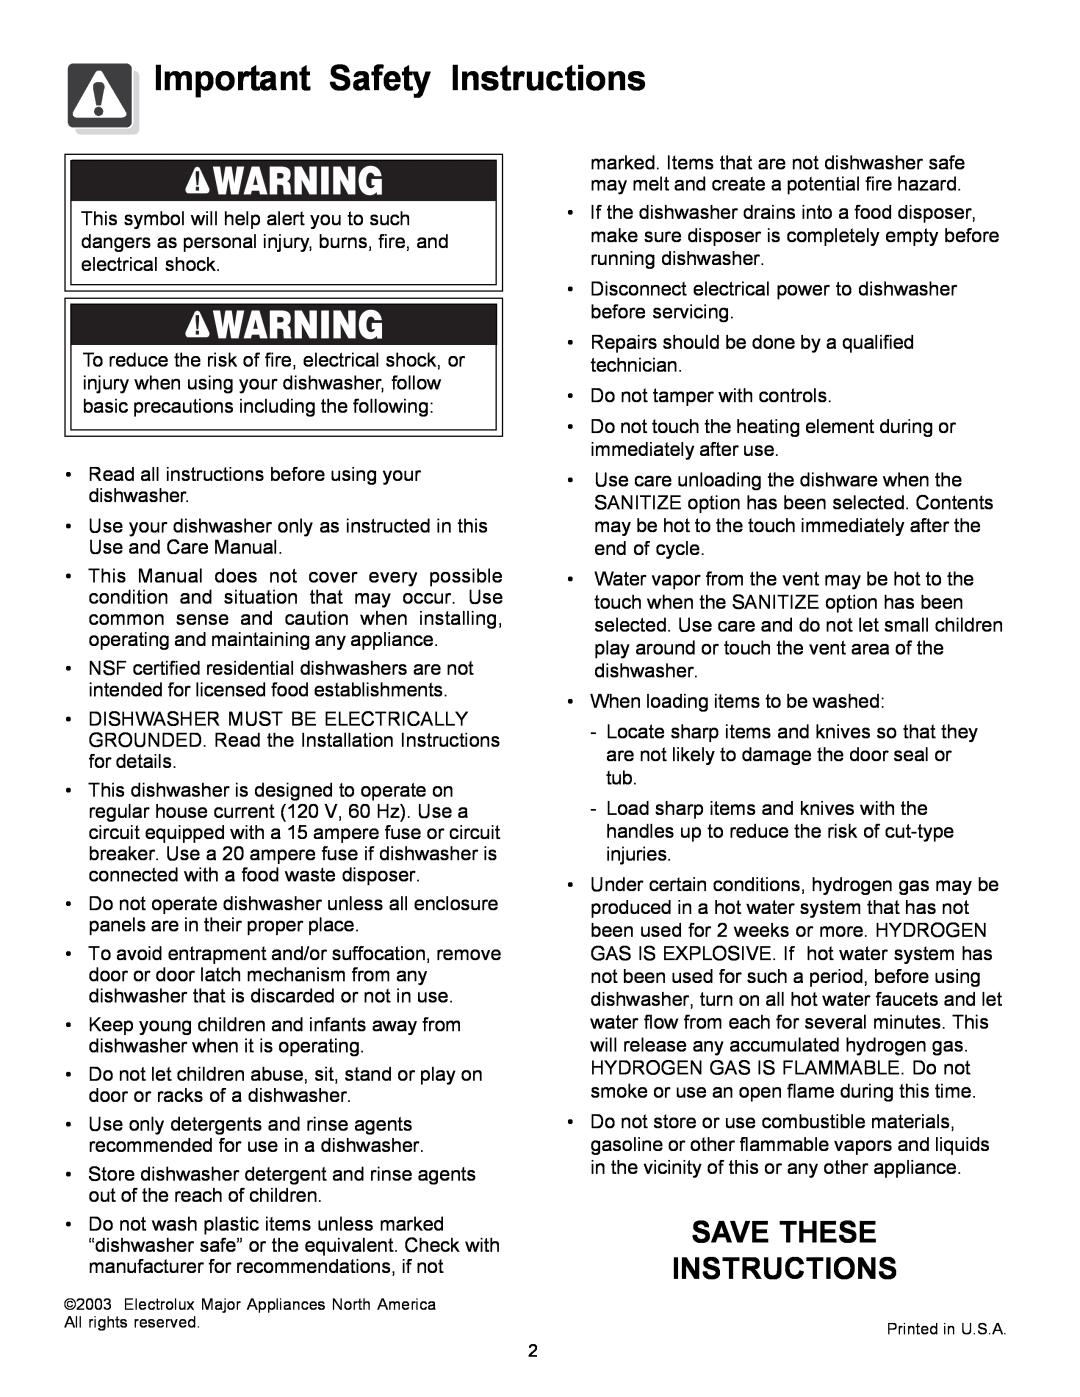 Frigidaire 1000 Series warranty Important Safety Instructions, Save These Instructions 